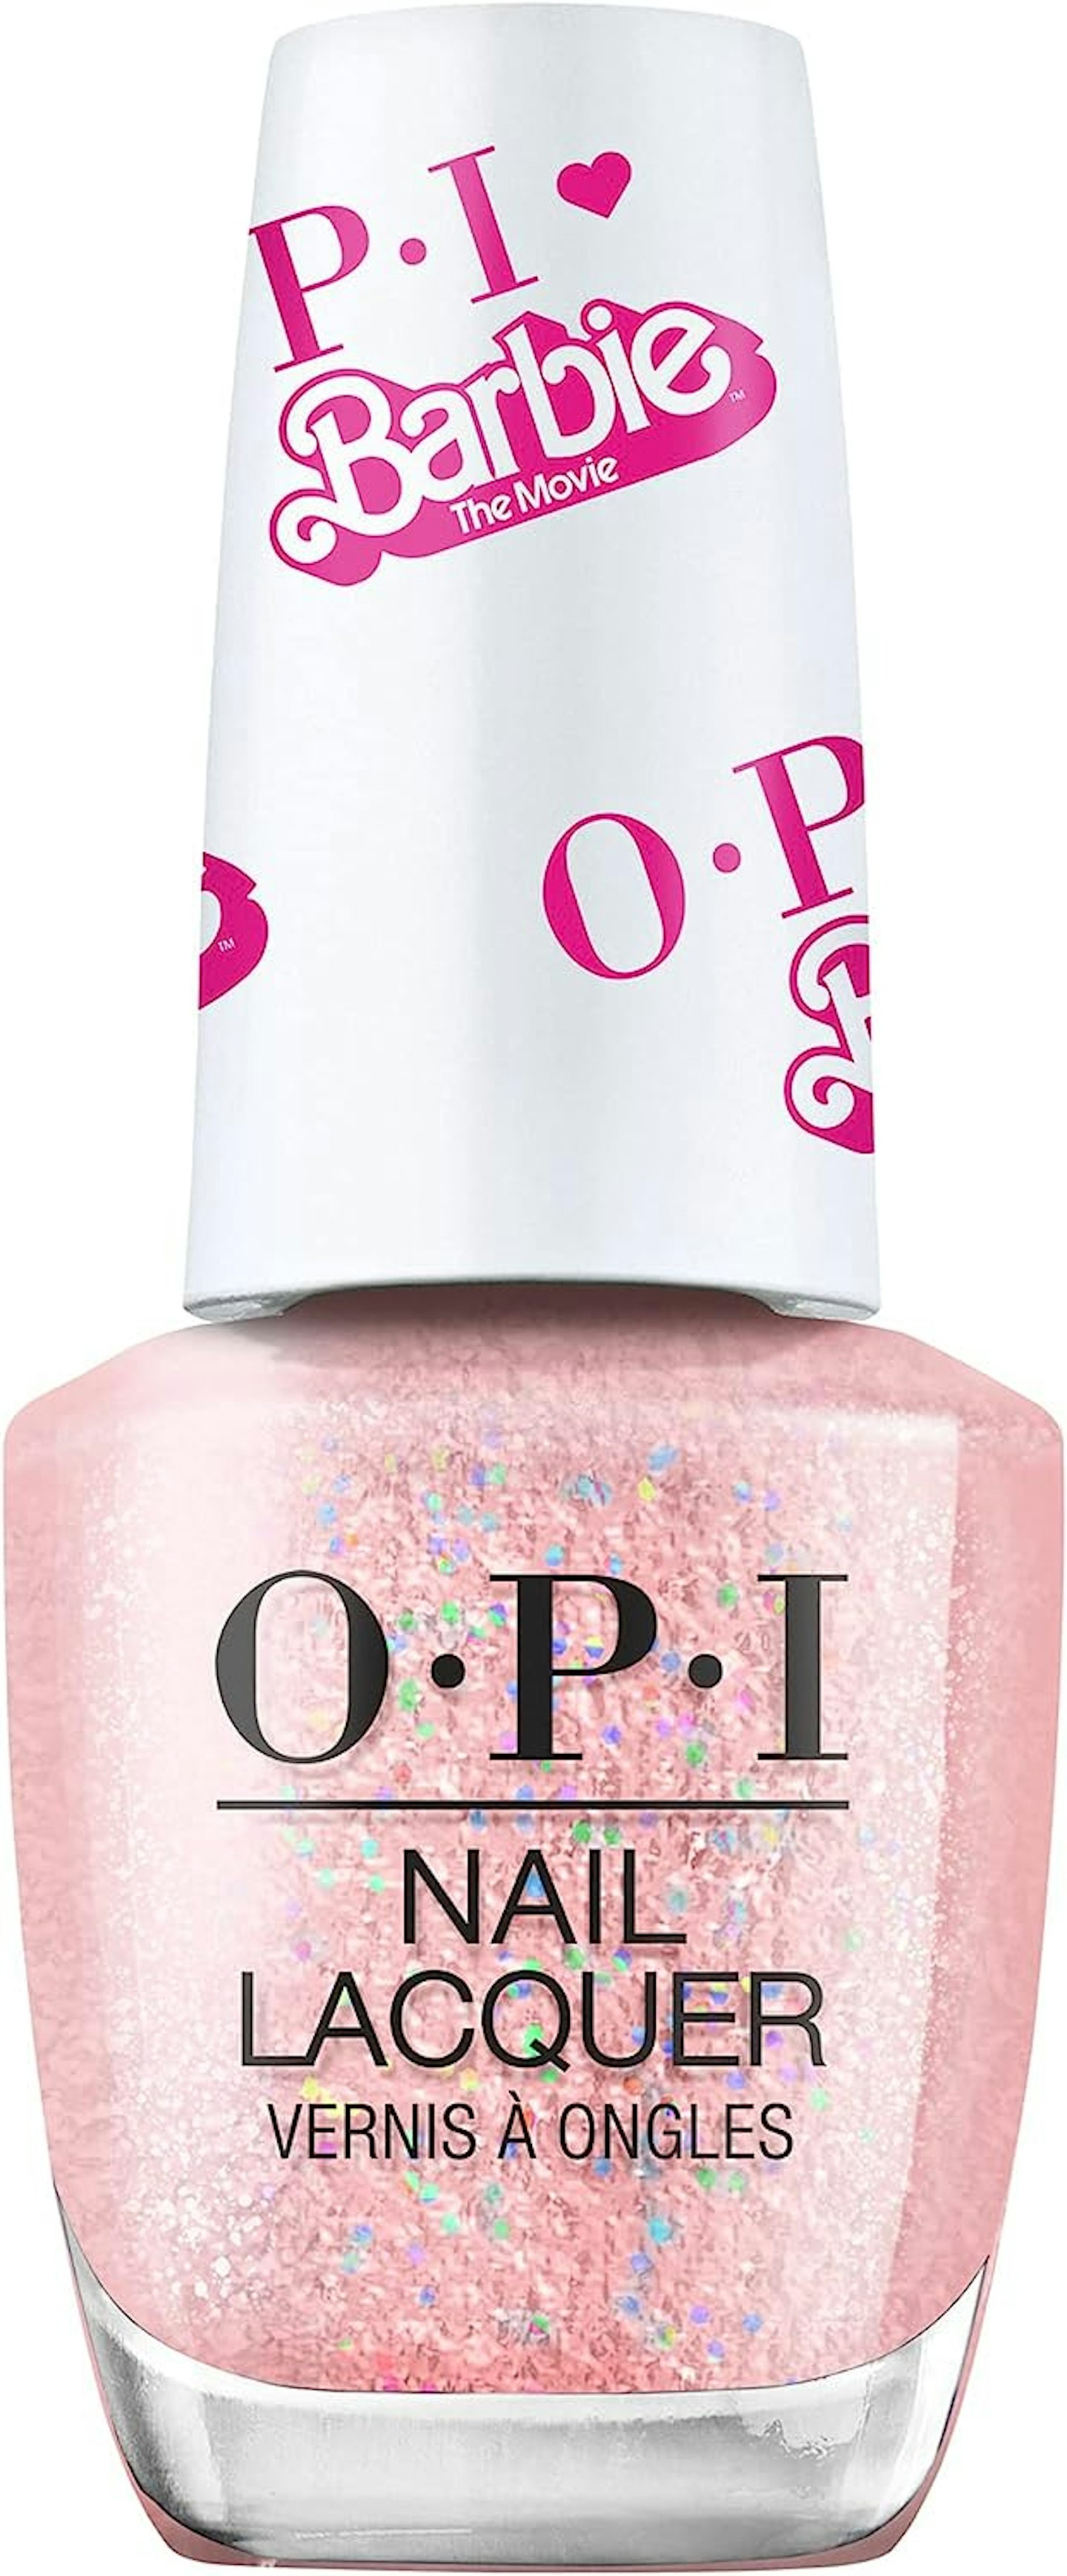 OPI x Barbie Collection, Best Day Ever Pink French Manicure